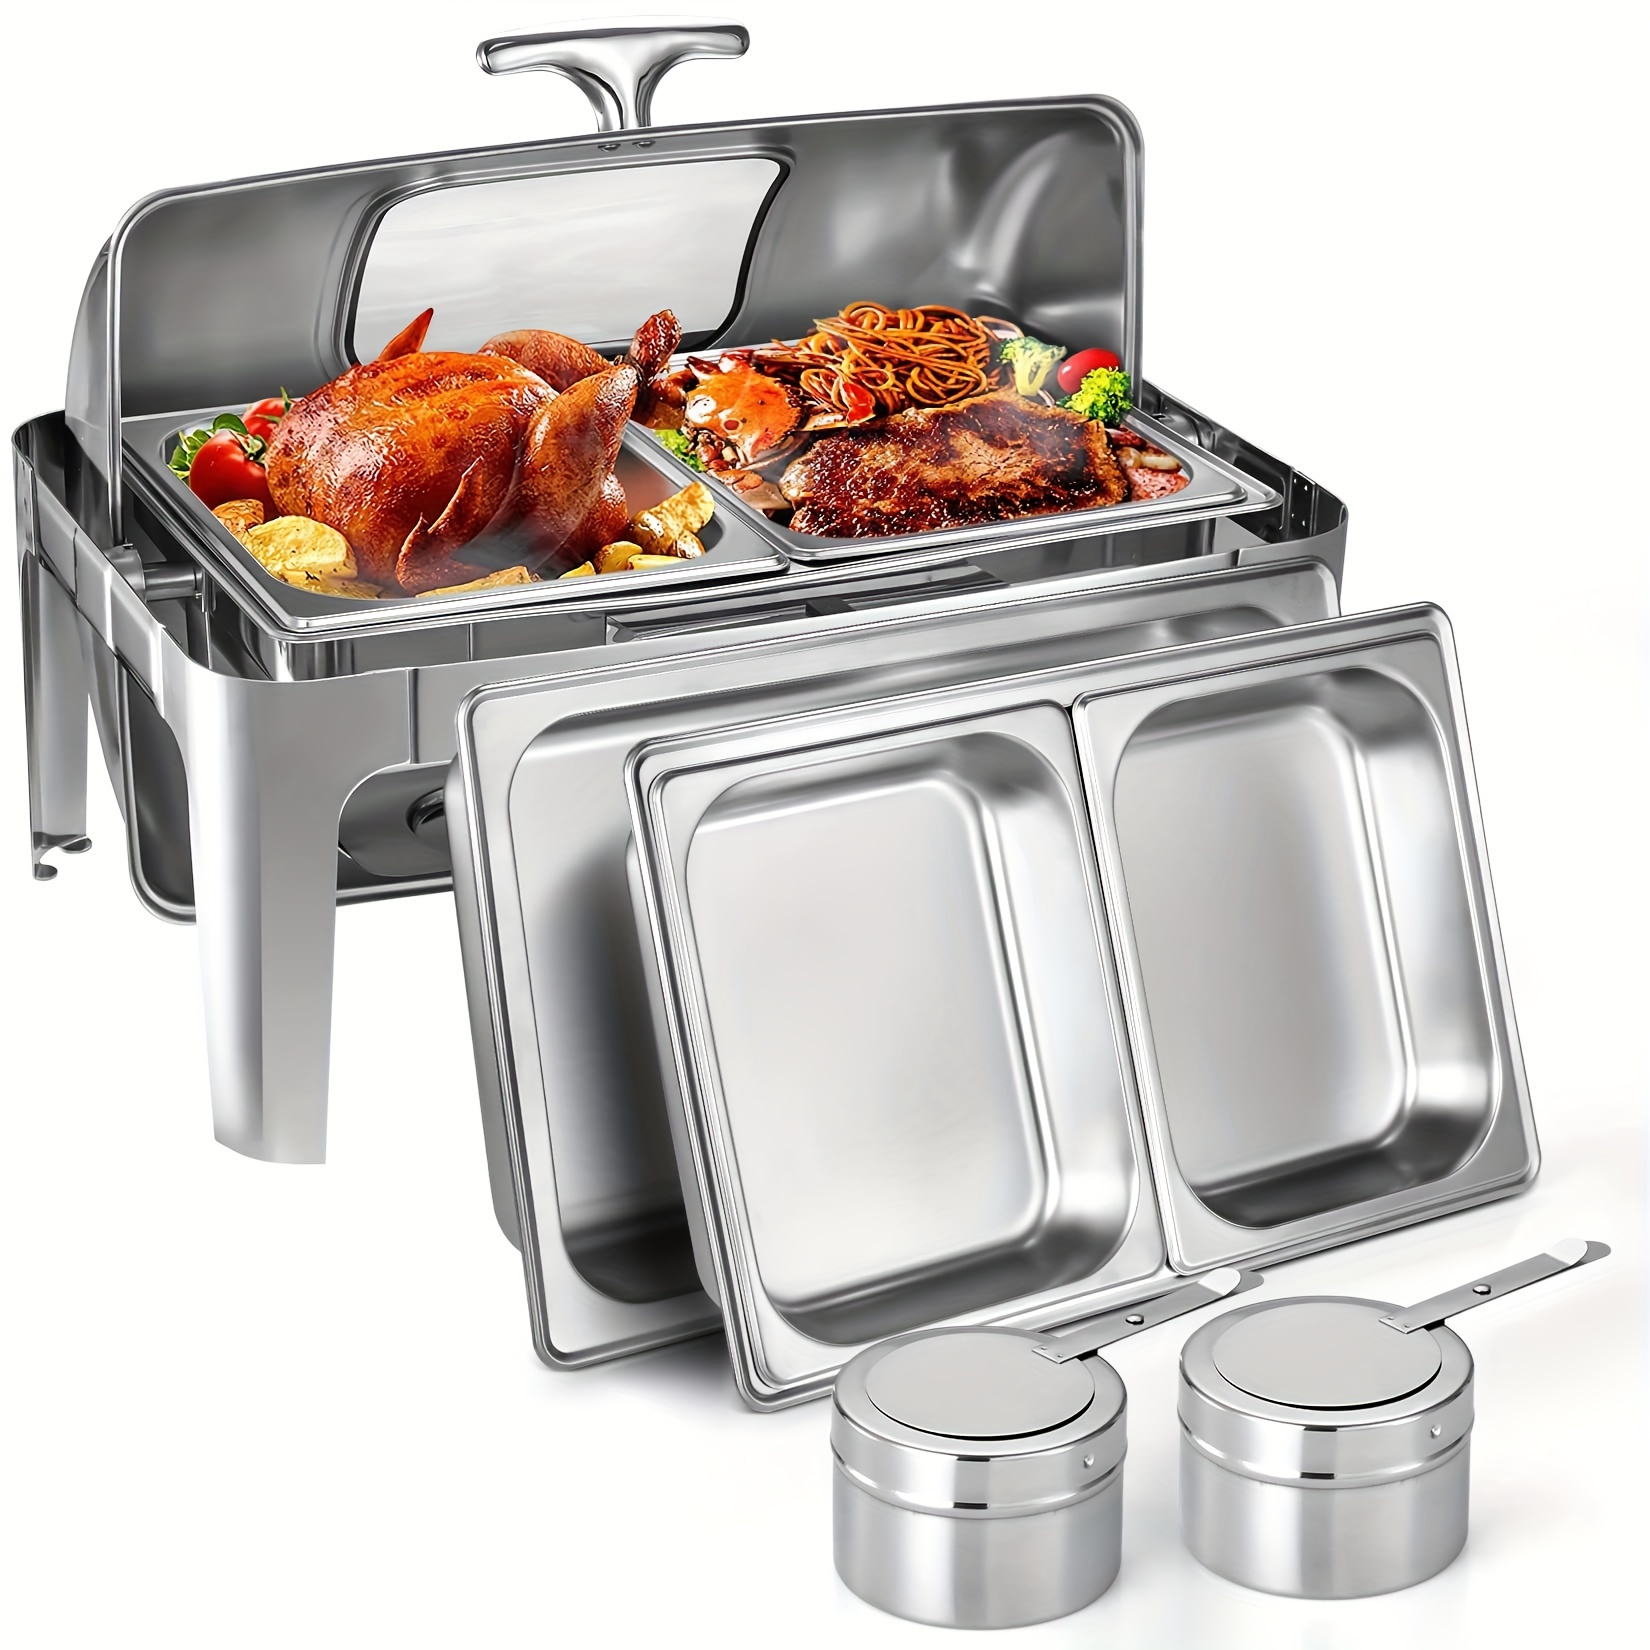 

9 Qt Roll Top Chafing Dish Buffet Set, Professional Food Warmer Buffet Set For Party, 1/2 Size Pan, Stainless Steel